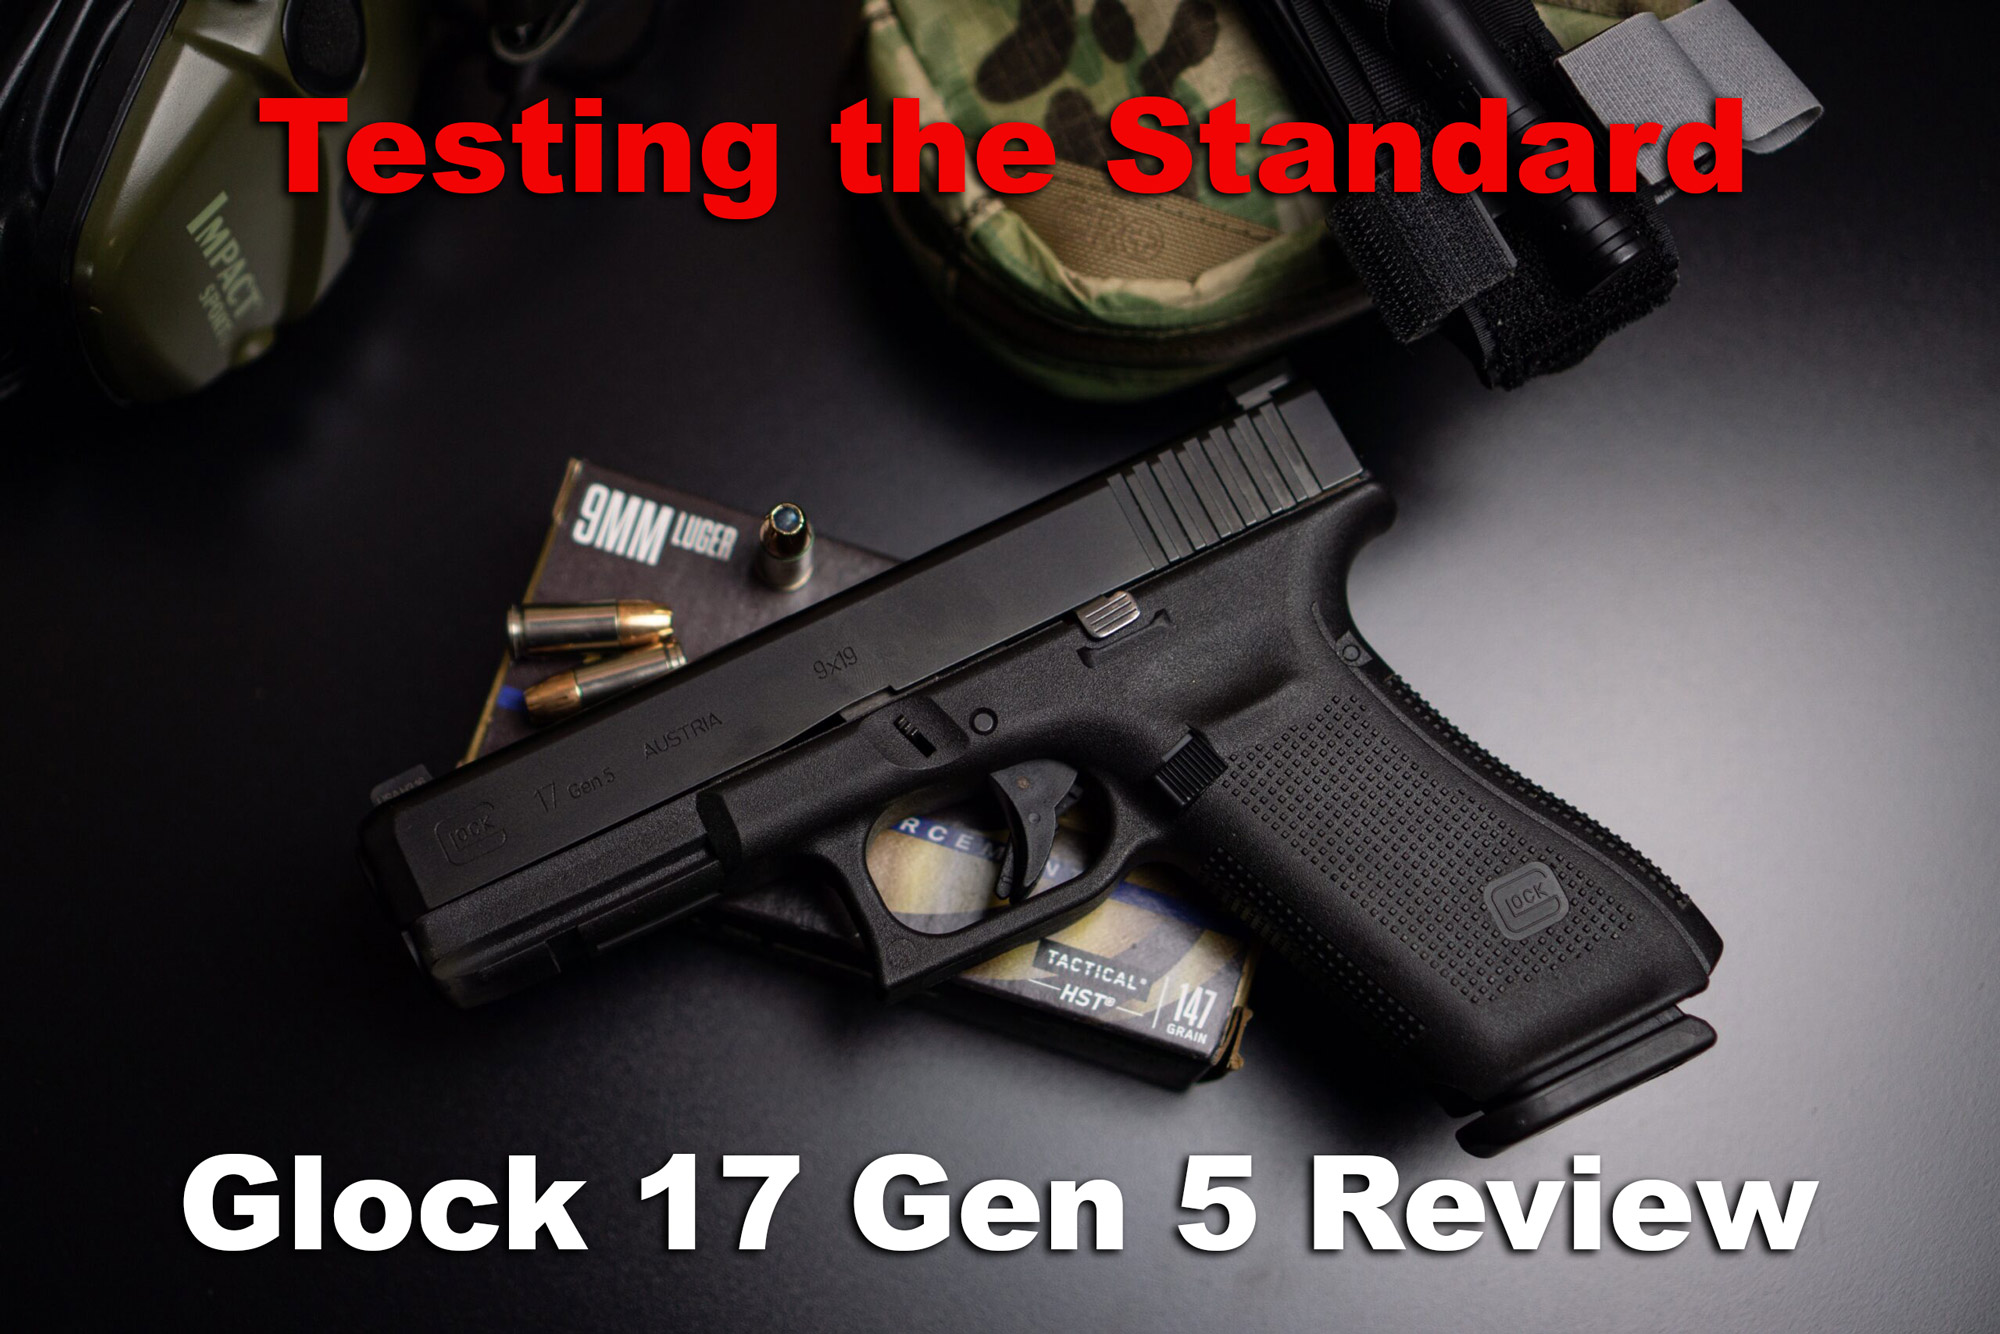 Glock 17 Gen 5 Review: Is It Worth the Upgrade? - USA Carry